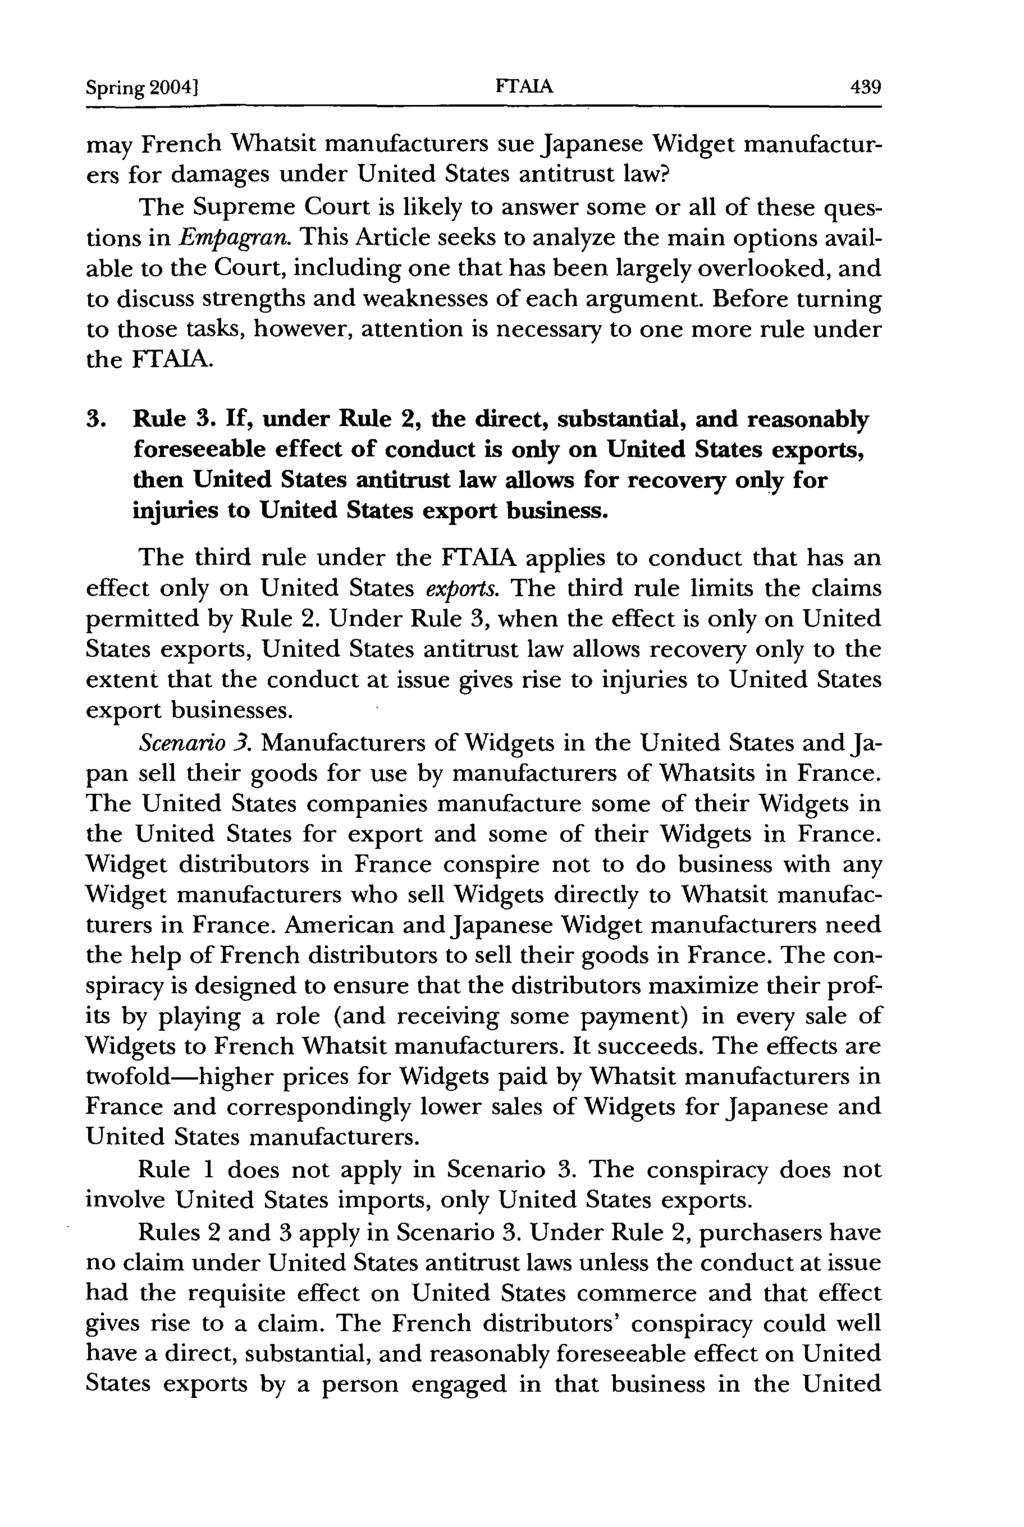 Spring 2004] FIrAIA may French Whatsit manufacturers sue Japanese Widget manufacturers for damages under United States antitrust law?